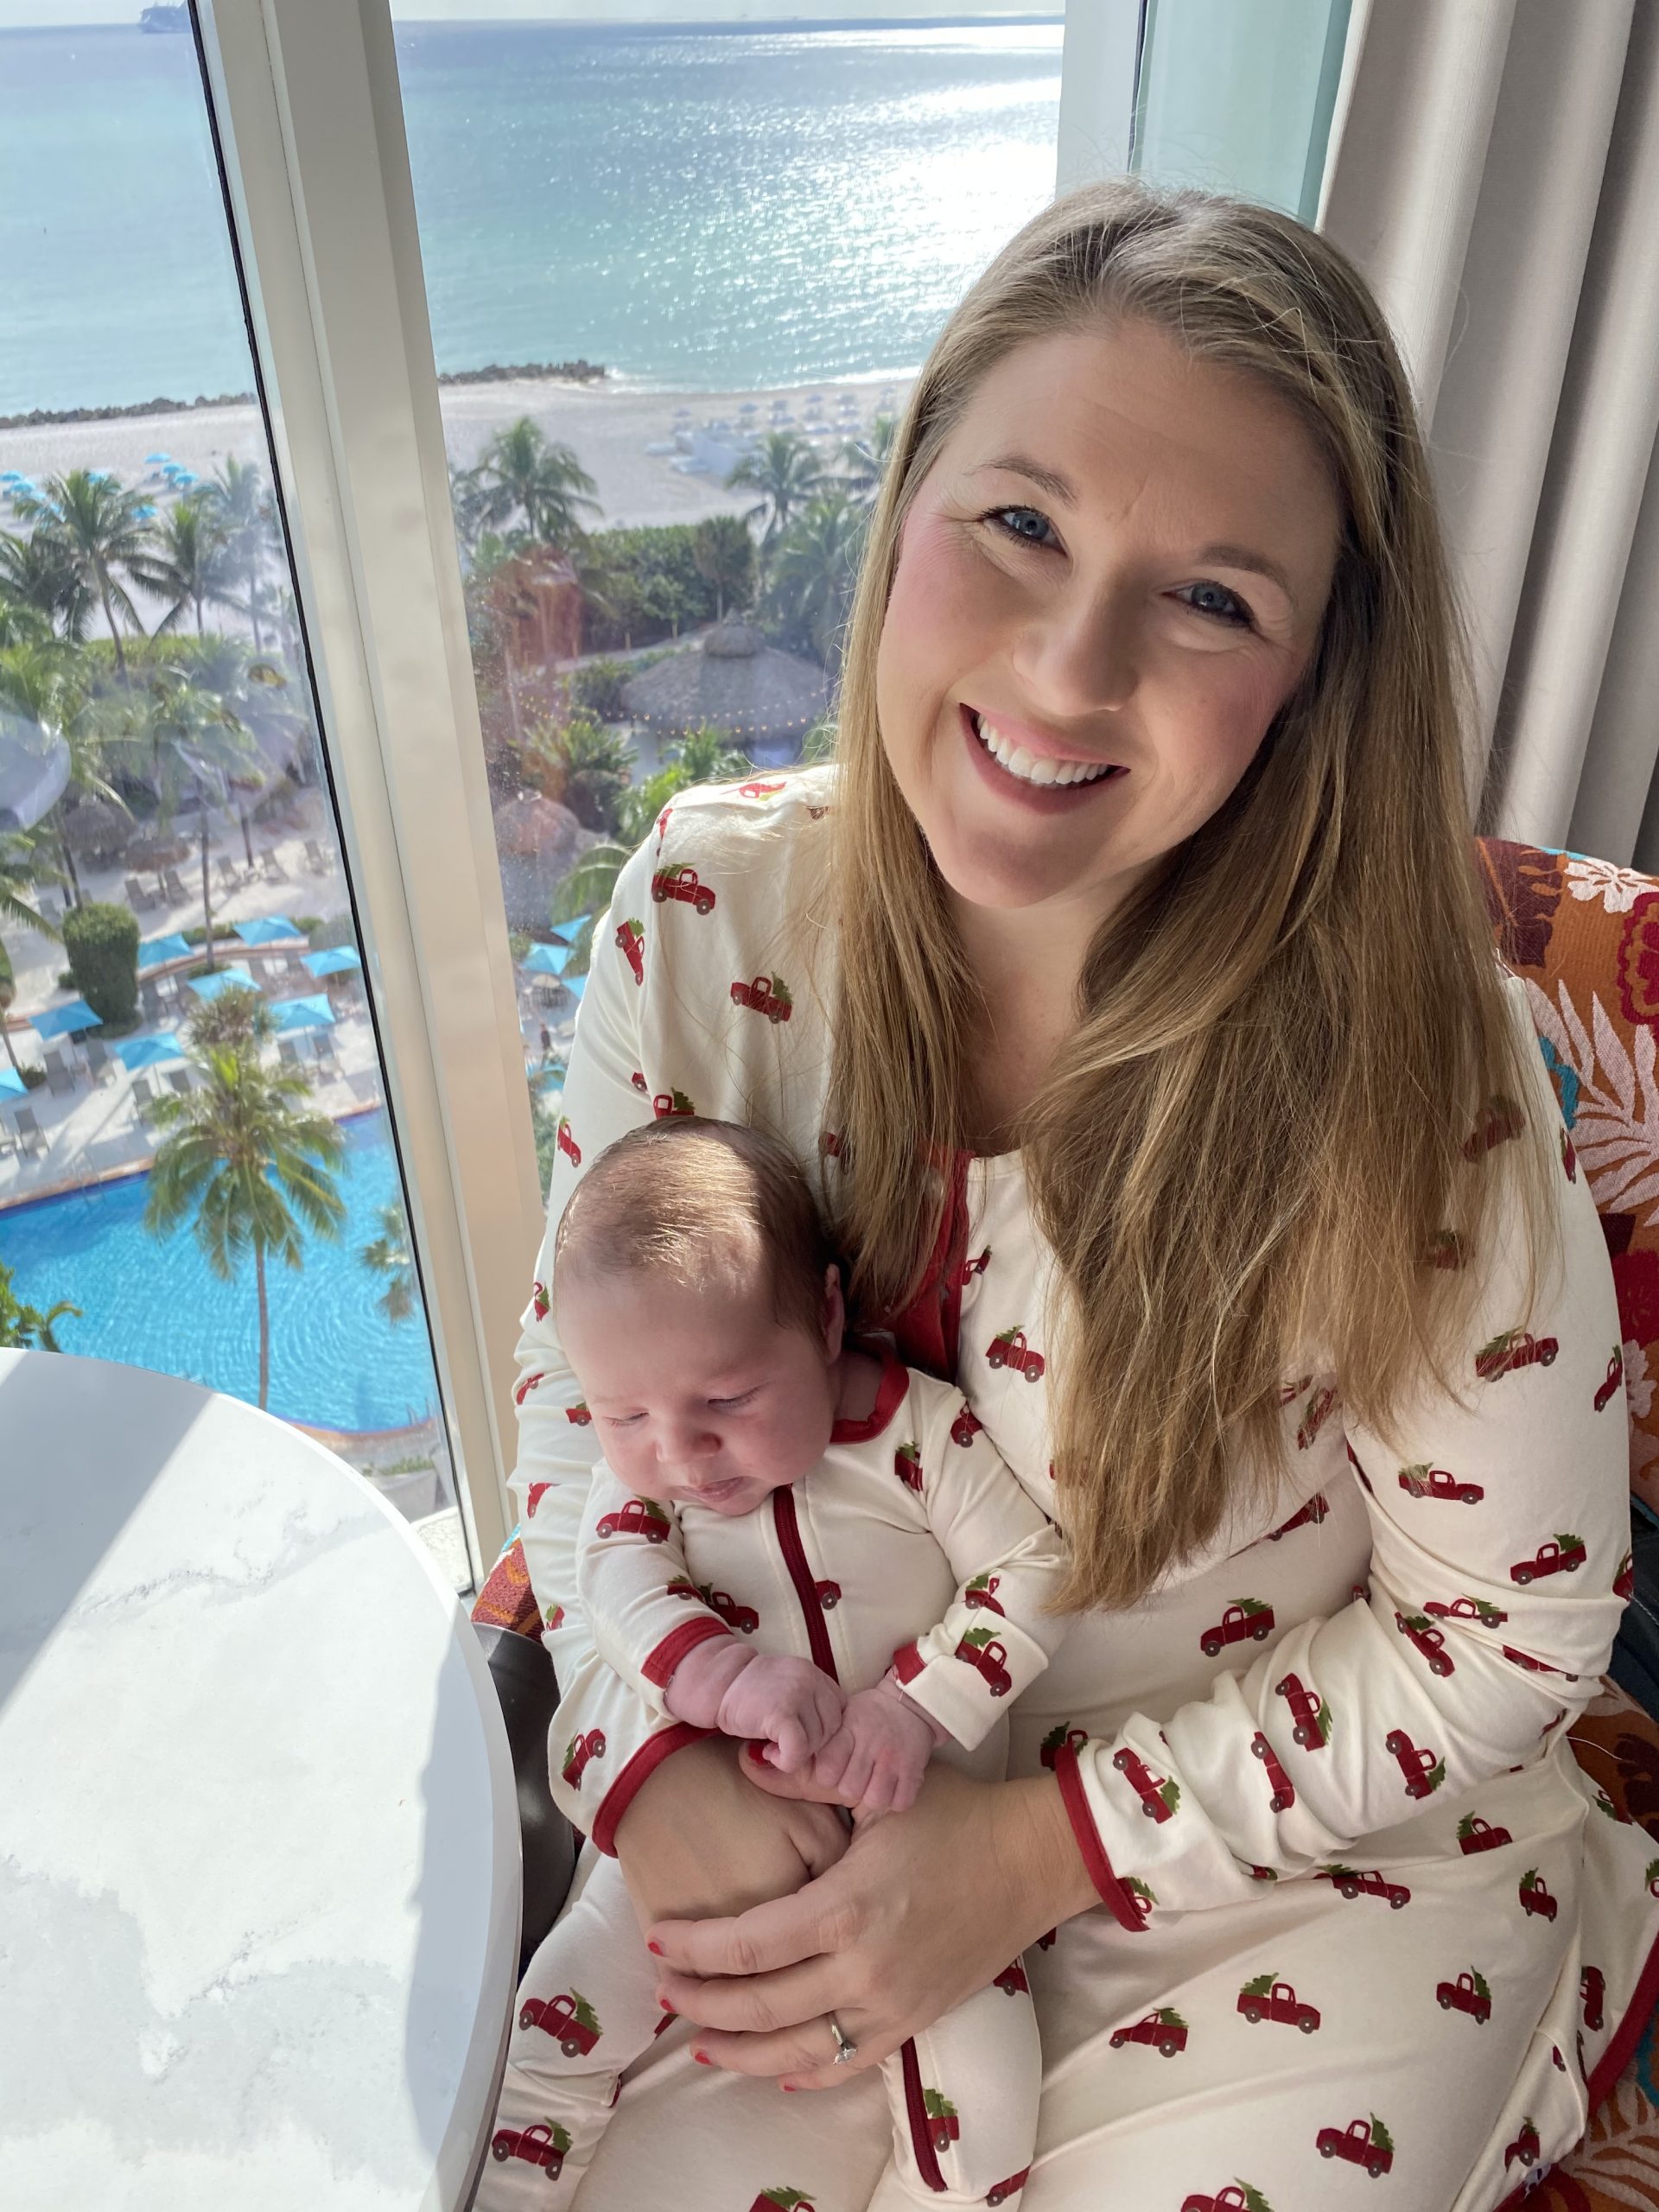 The Palms Hotel & Spa: Staycation or Vacation in Miami Beach Miami Mom Collective 